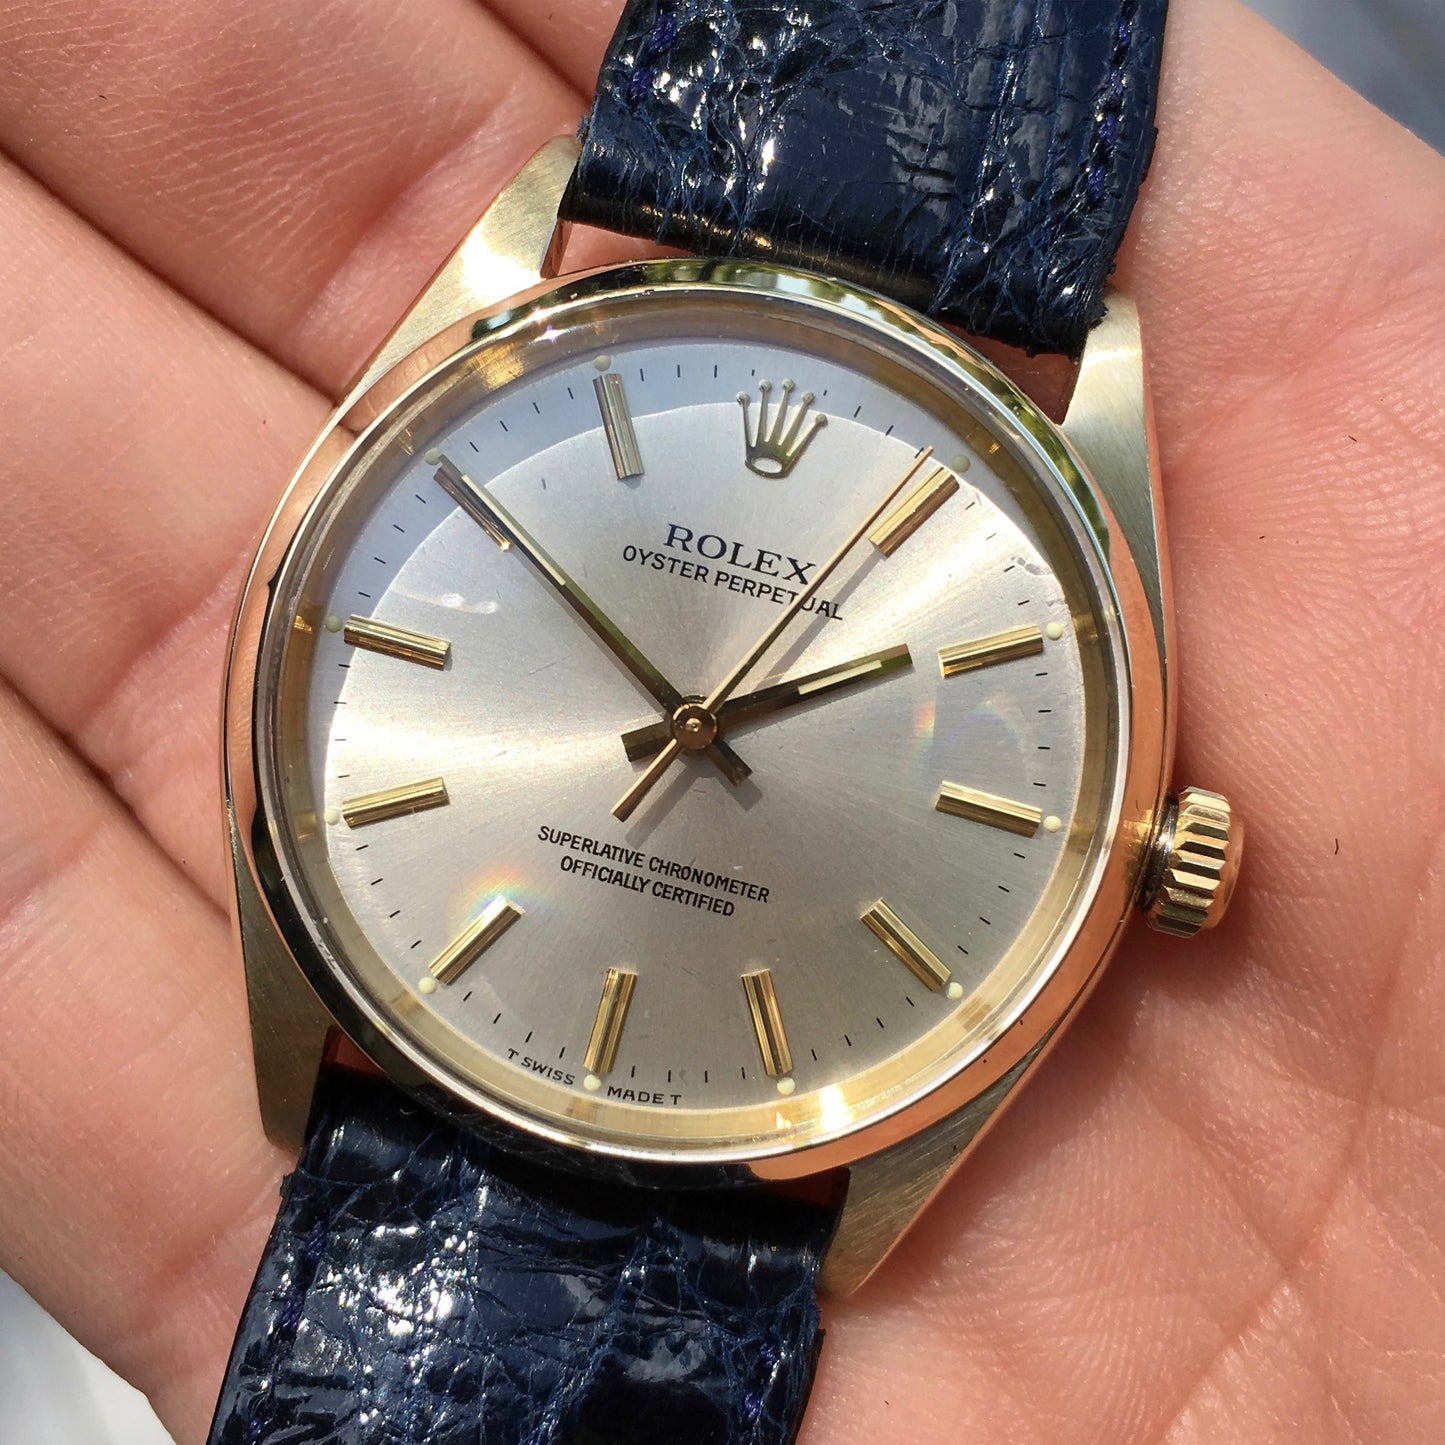 Vintage Rolex Oyster Perpetual 1002 14K Yellow Gold Caliber 1560 Silver Wristwatch - Hashtag Watch Company